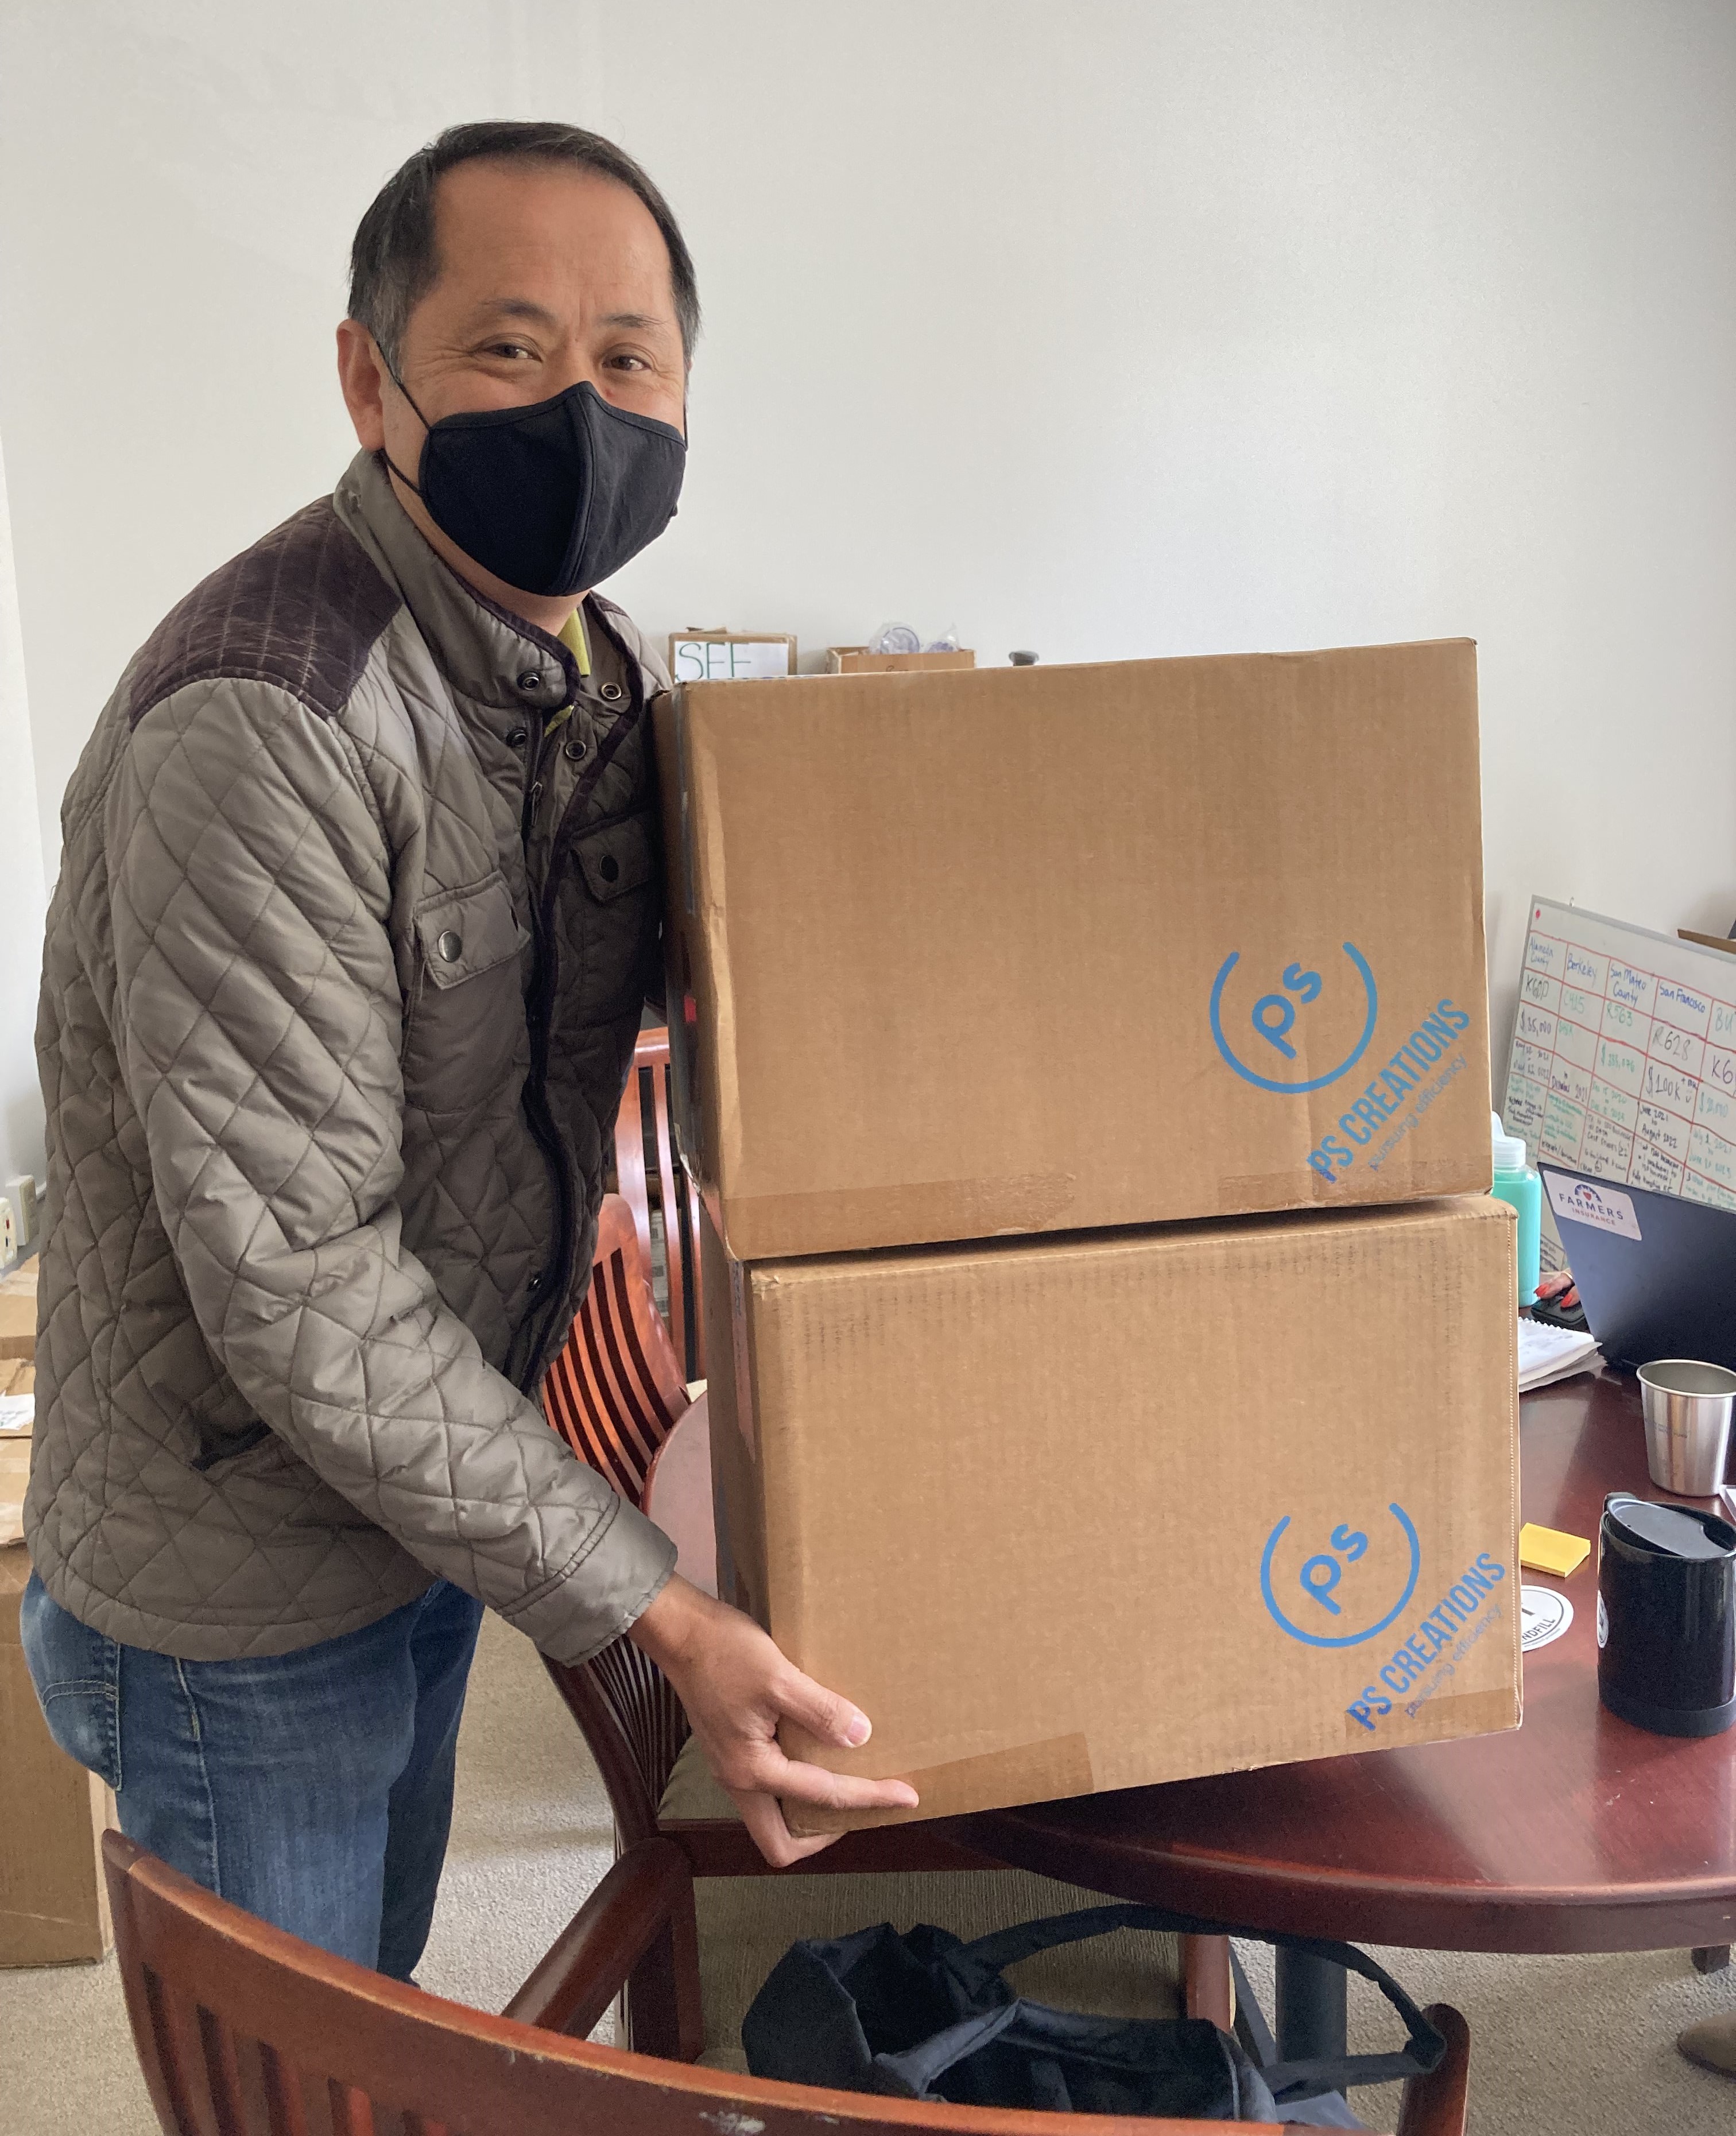 ReThink Disposable staff poses with box full of reusable dishware being delivered to a local business